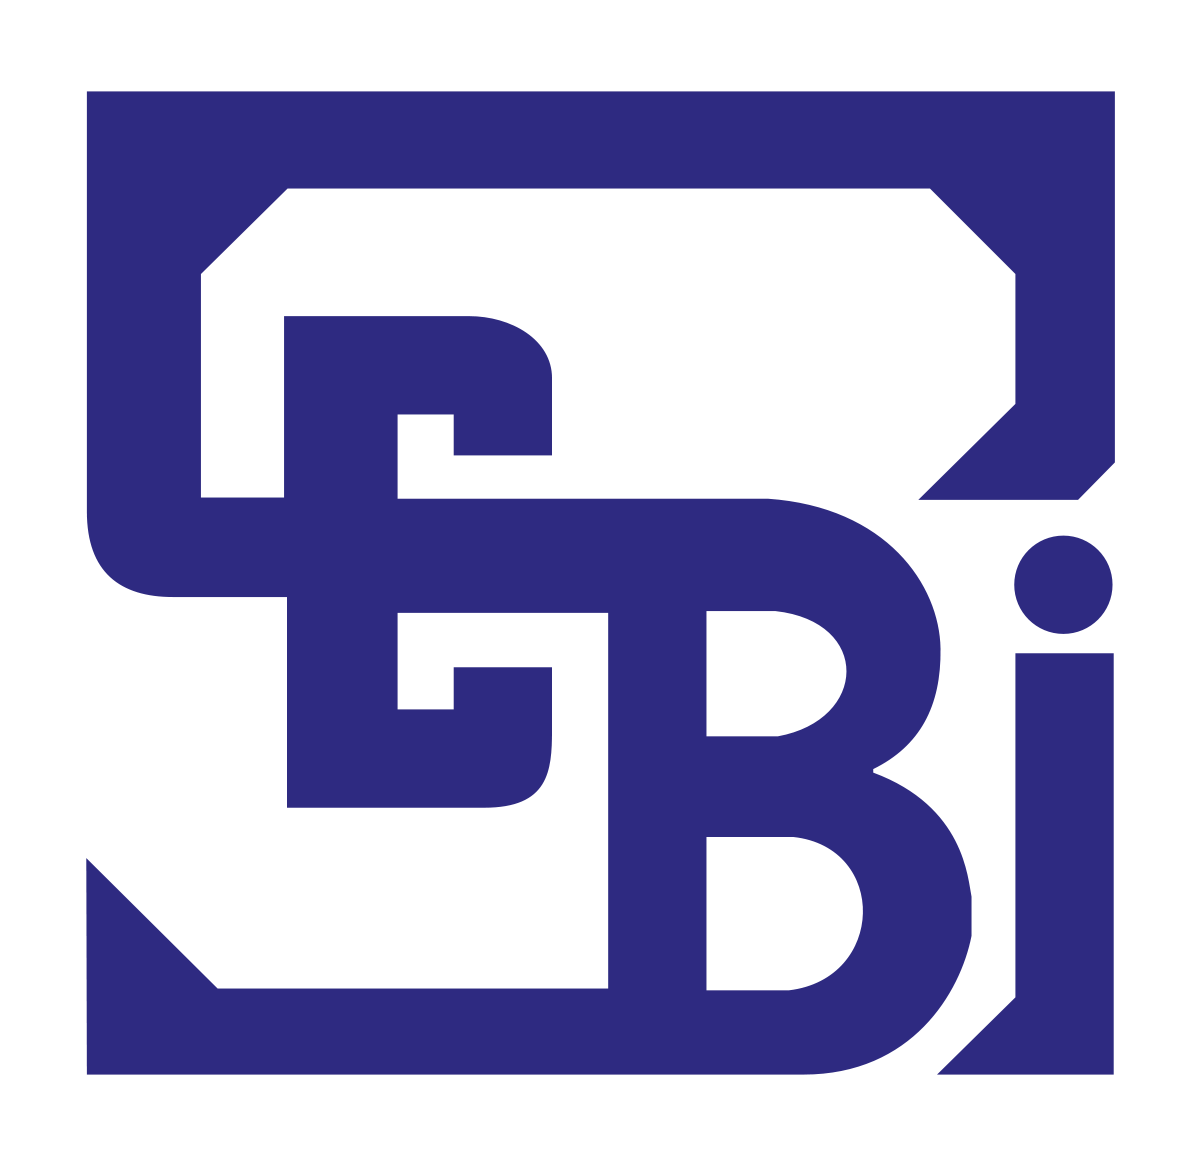 SC-appointed panel, SEBI 'hit walls' in probing Adani group's transactions: Cong